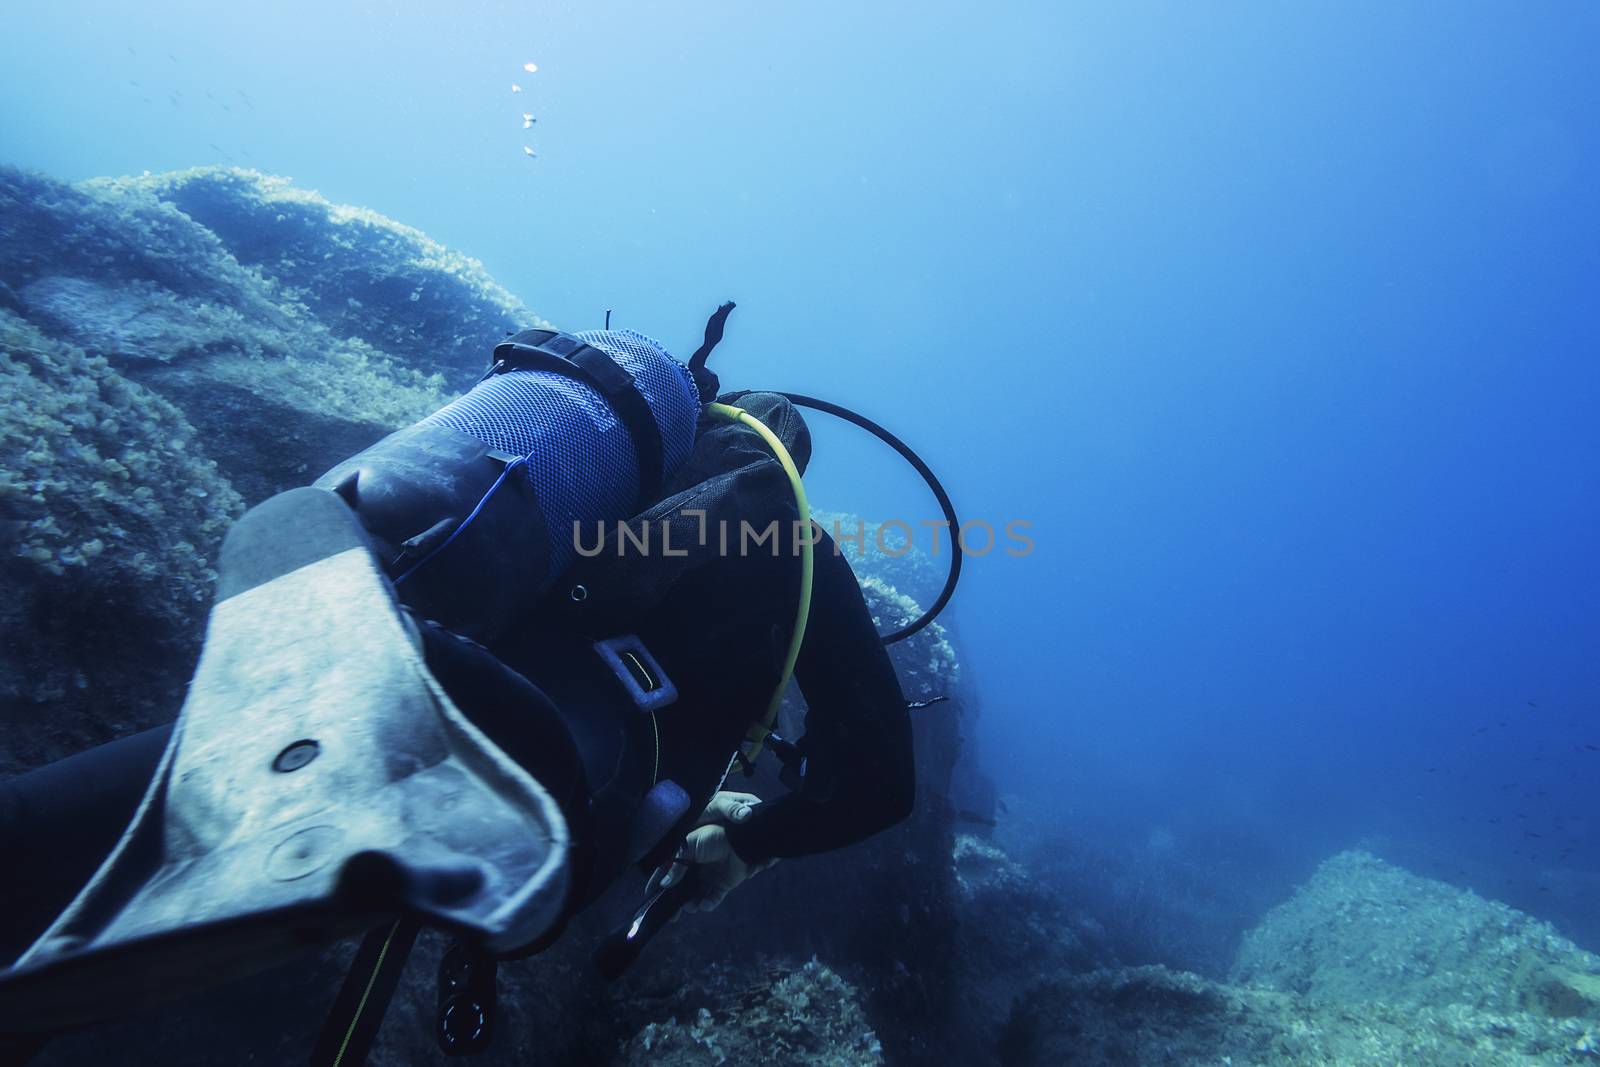 diver submerged in the blue sea near of the seabed by raulmelldo